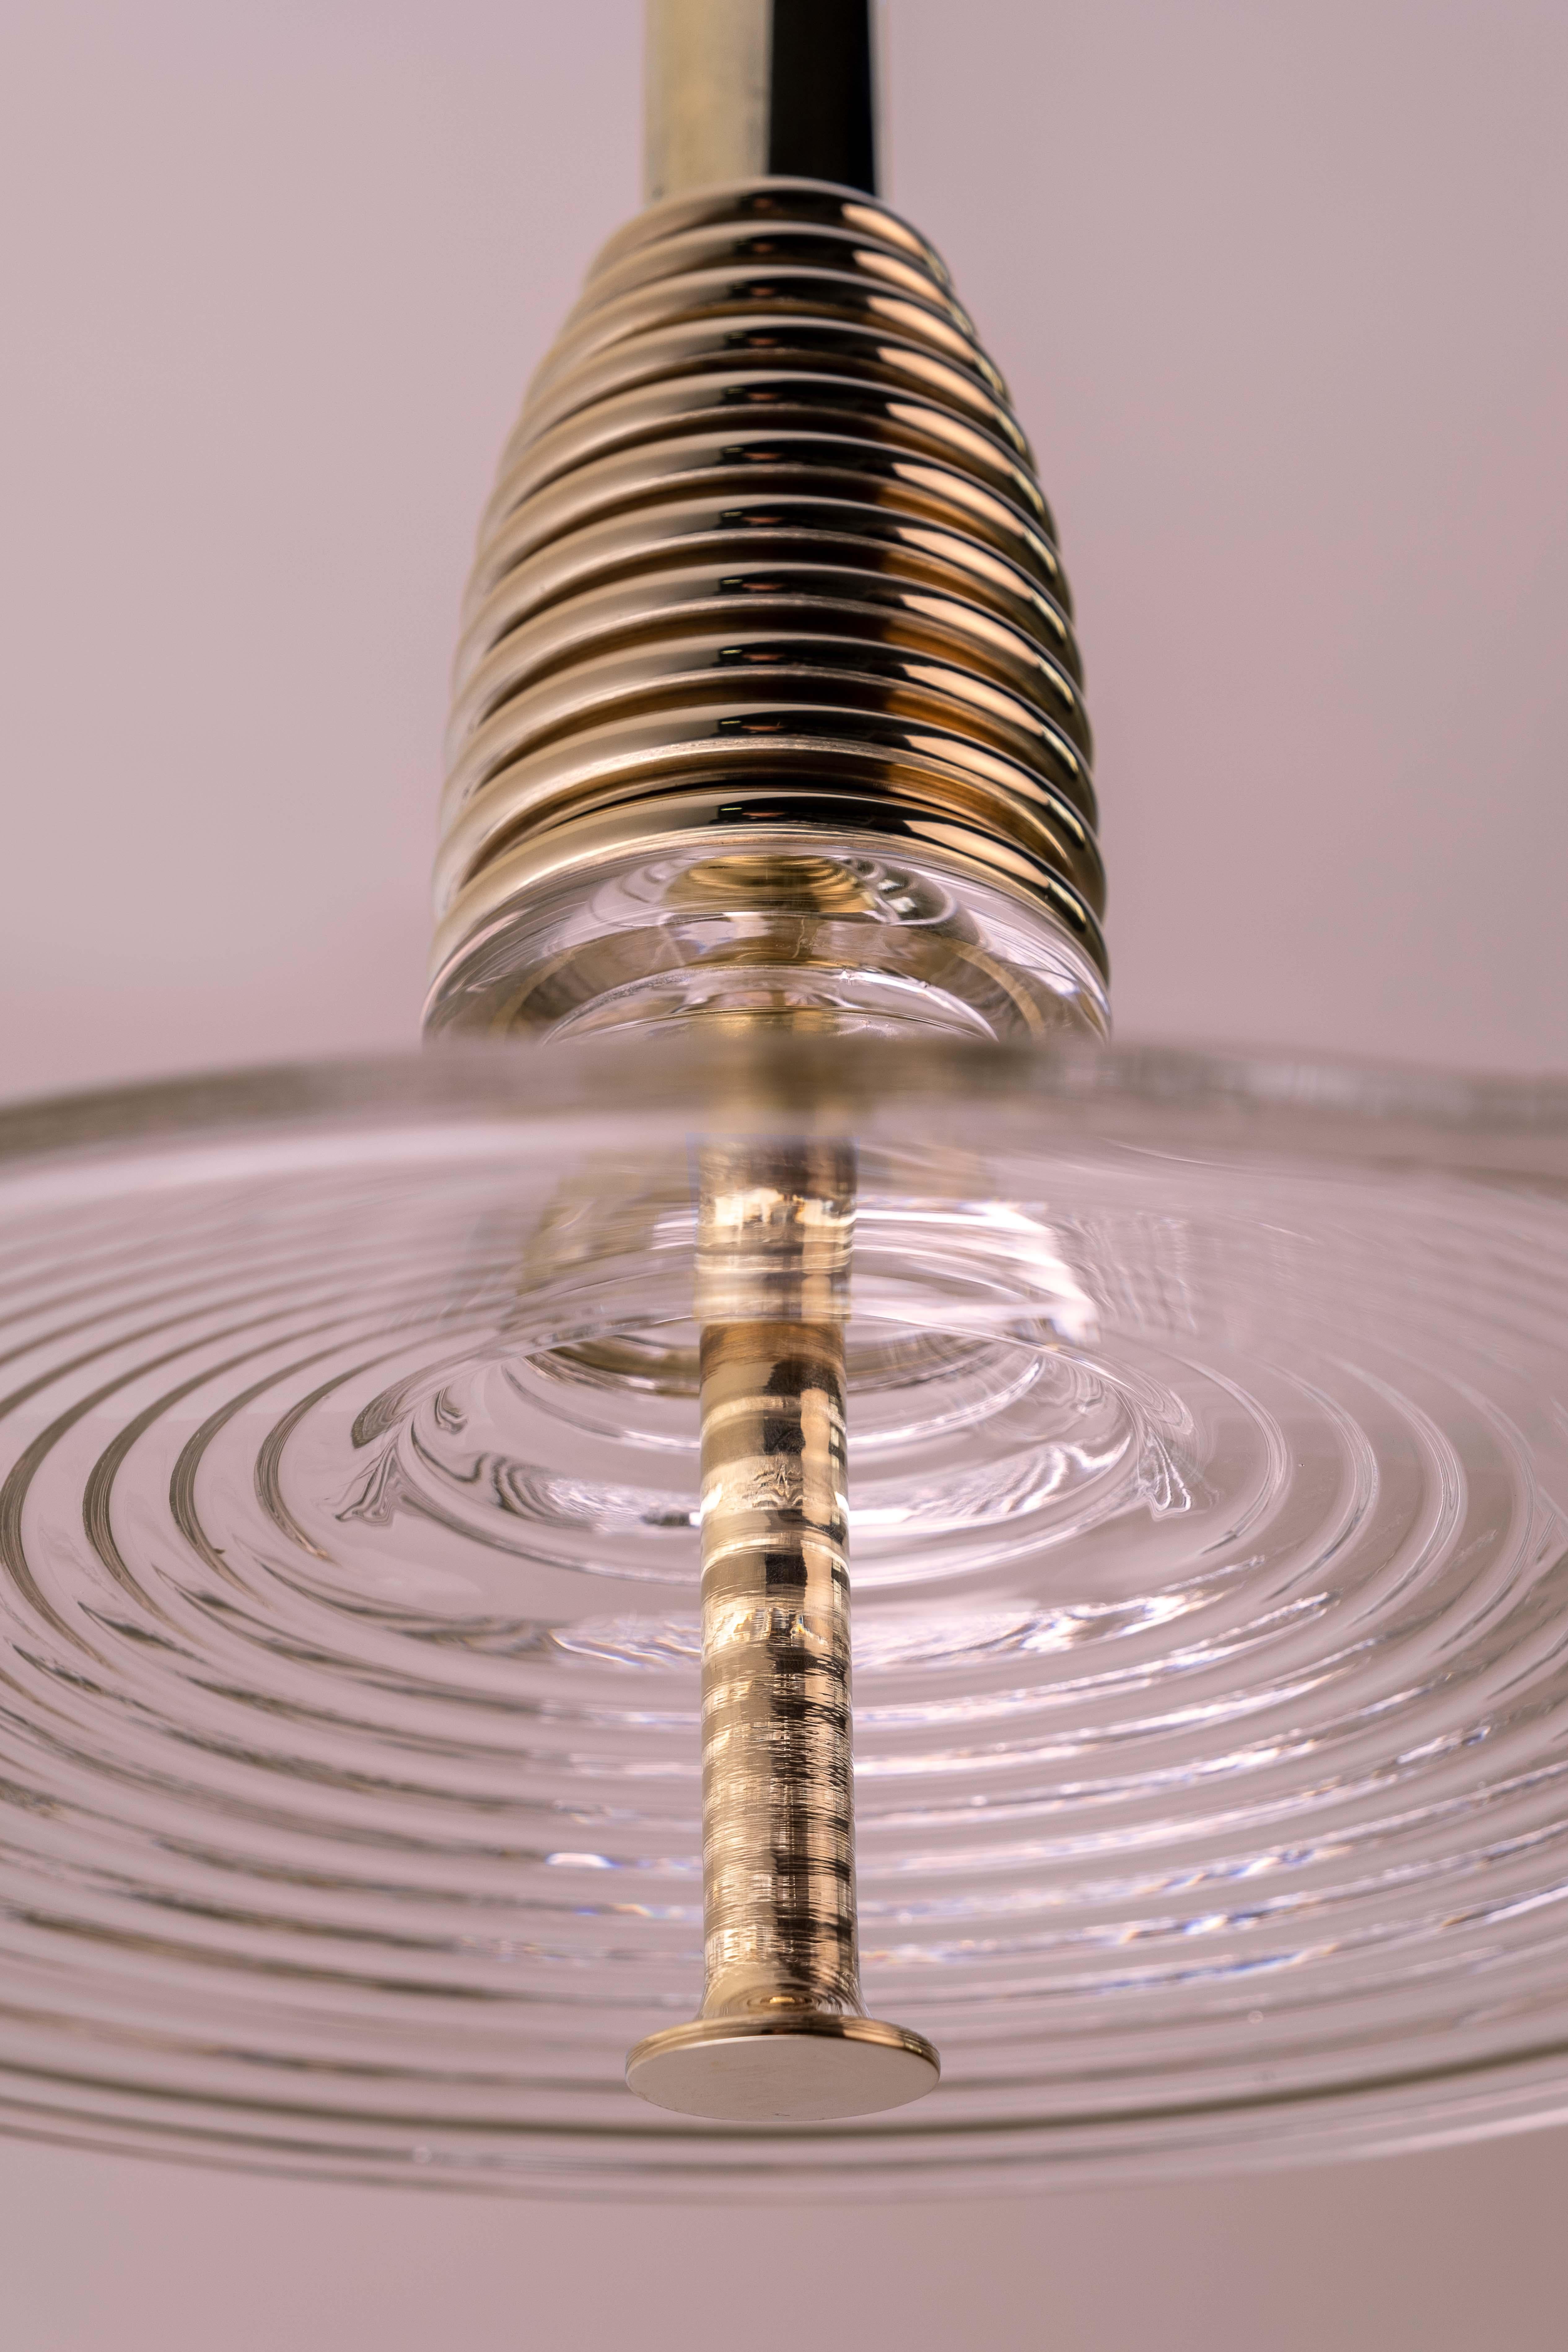 The Insulator 'B' Pendant in polished brass and clear glass by NOVOCASTRIAN deco For Sale 2